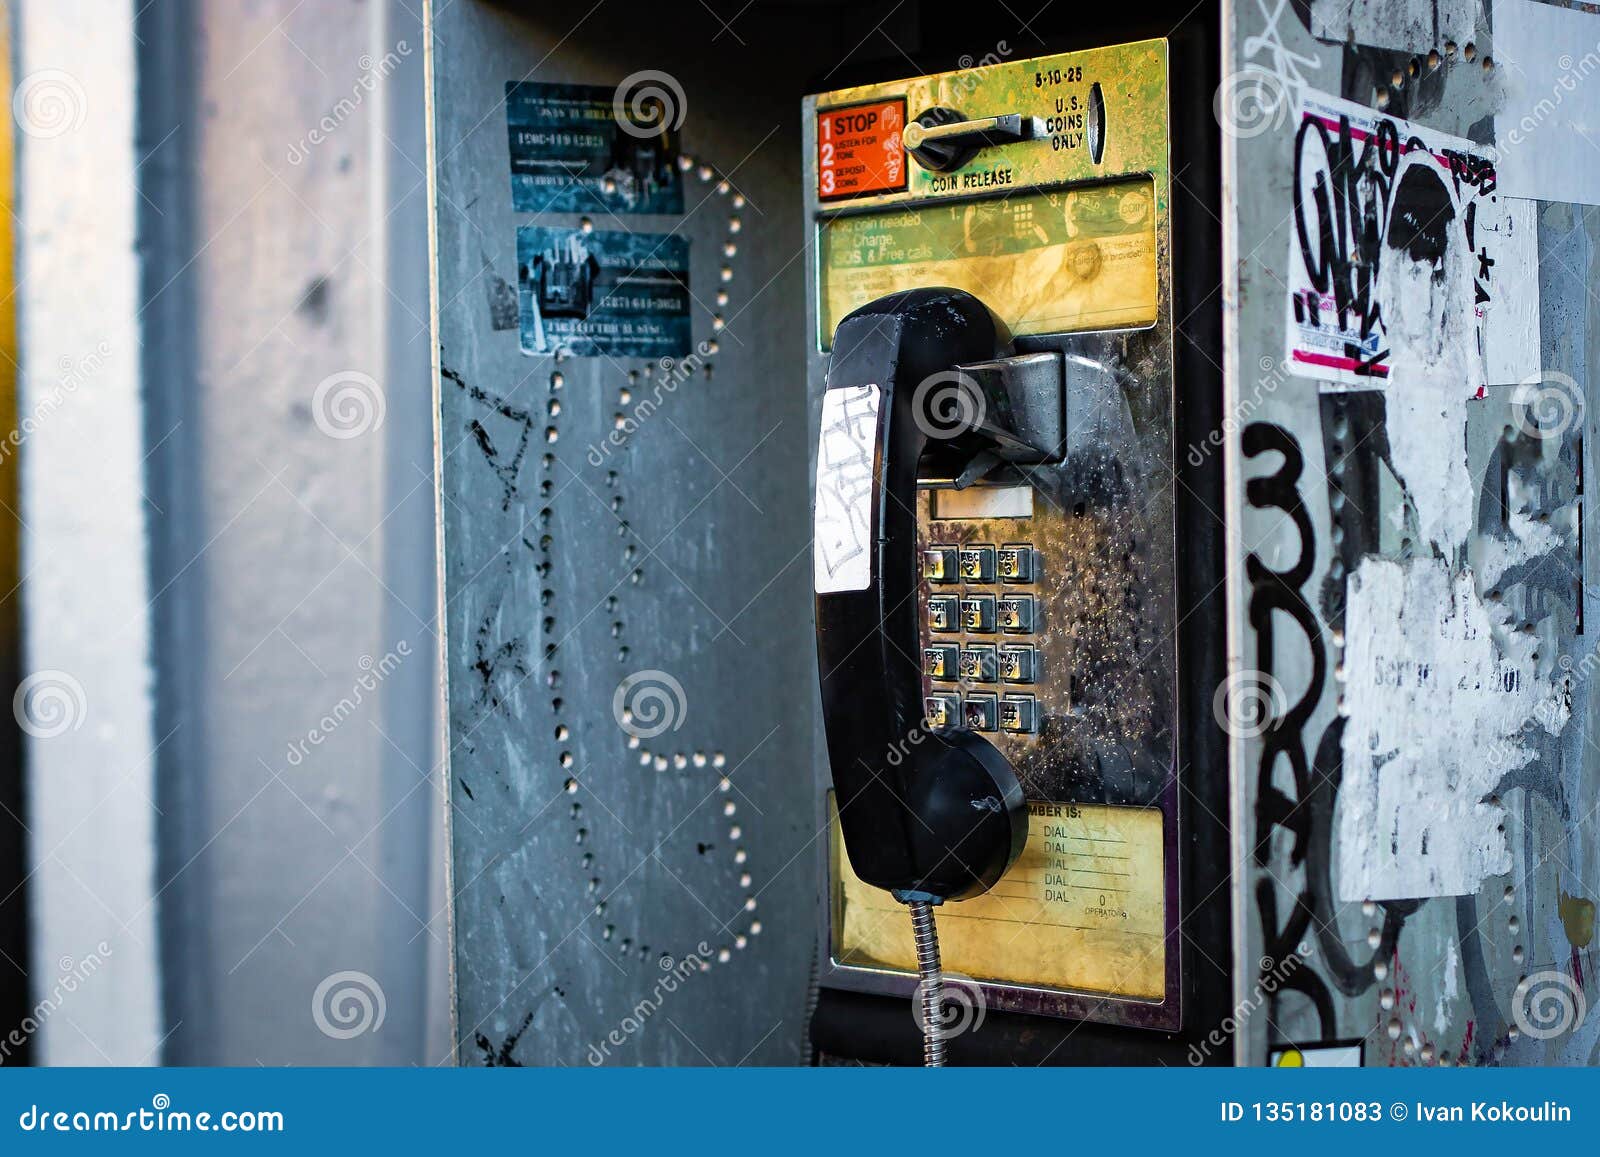 3, Coin Box Pay Phone Royalty-Free Photos and Stock Images | Shutterstock